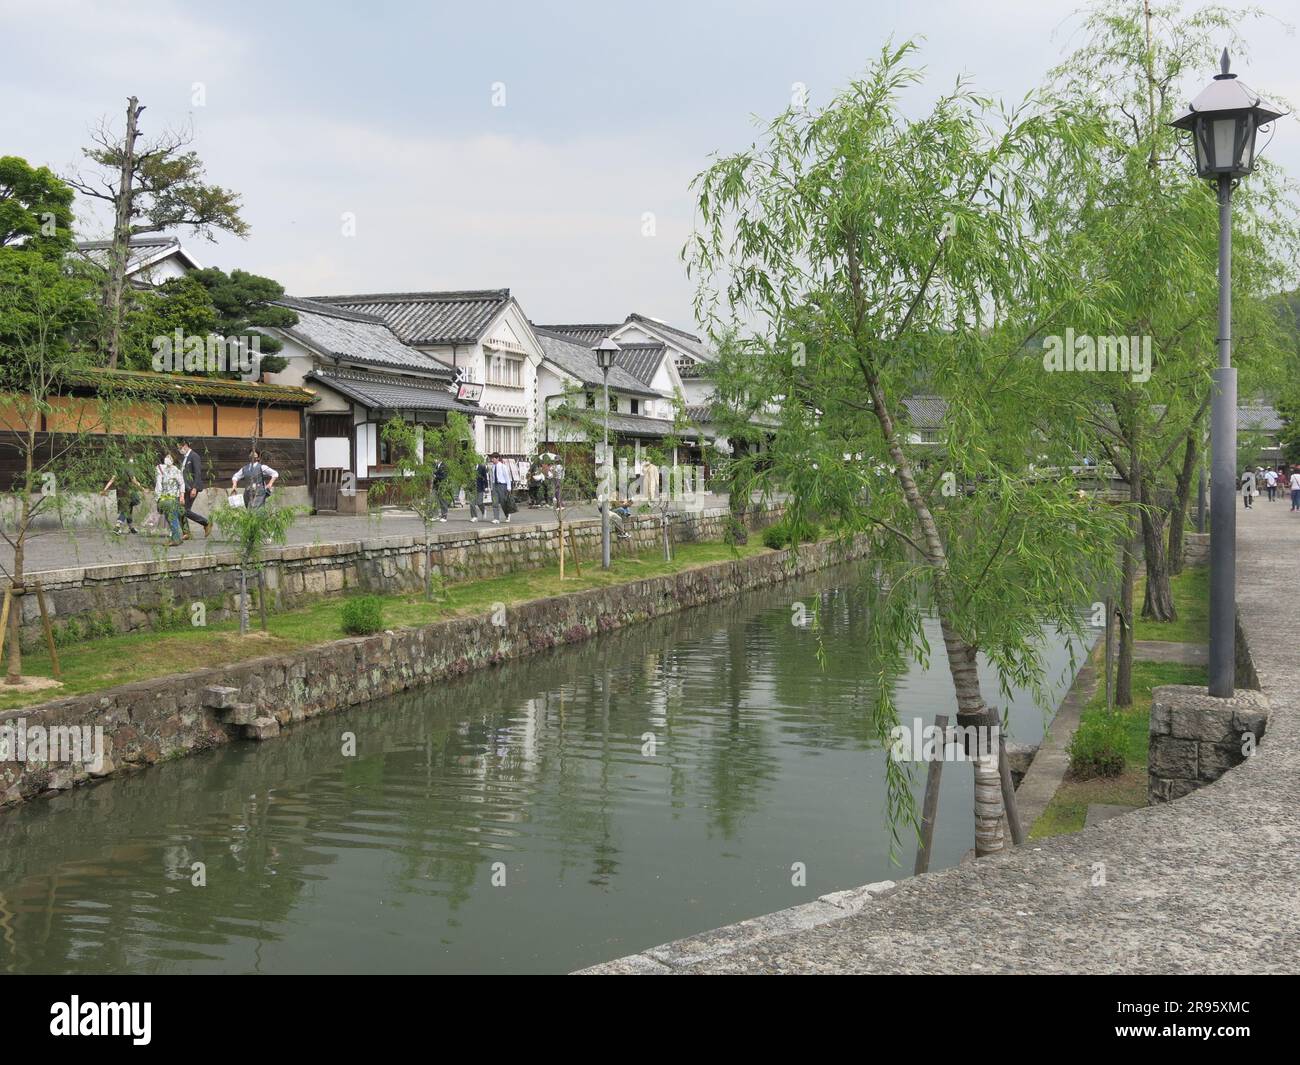 Kurashiki: one of the most picturesque towns in Japan with its white houses in the old merchant quarter and tree-lined canal with stone bridges. Stock Photo